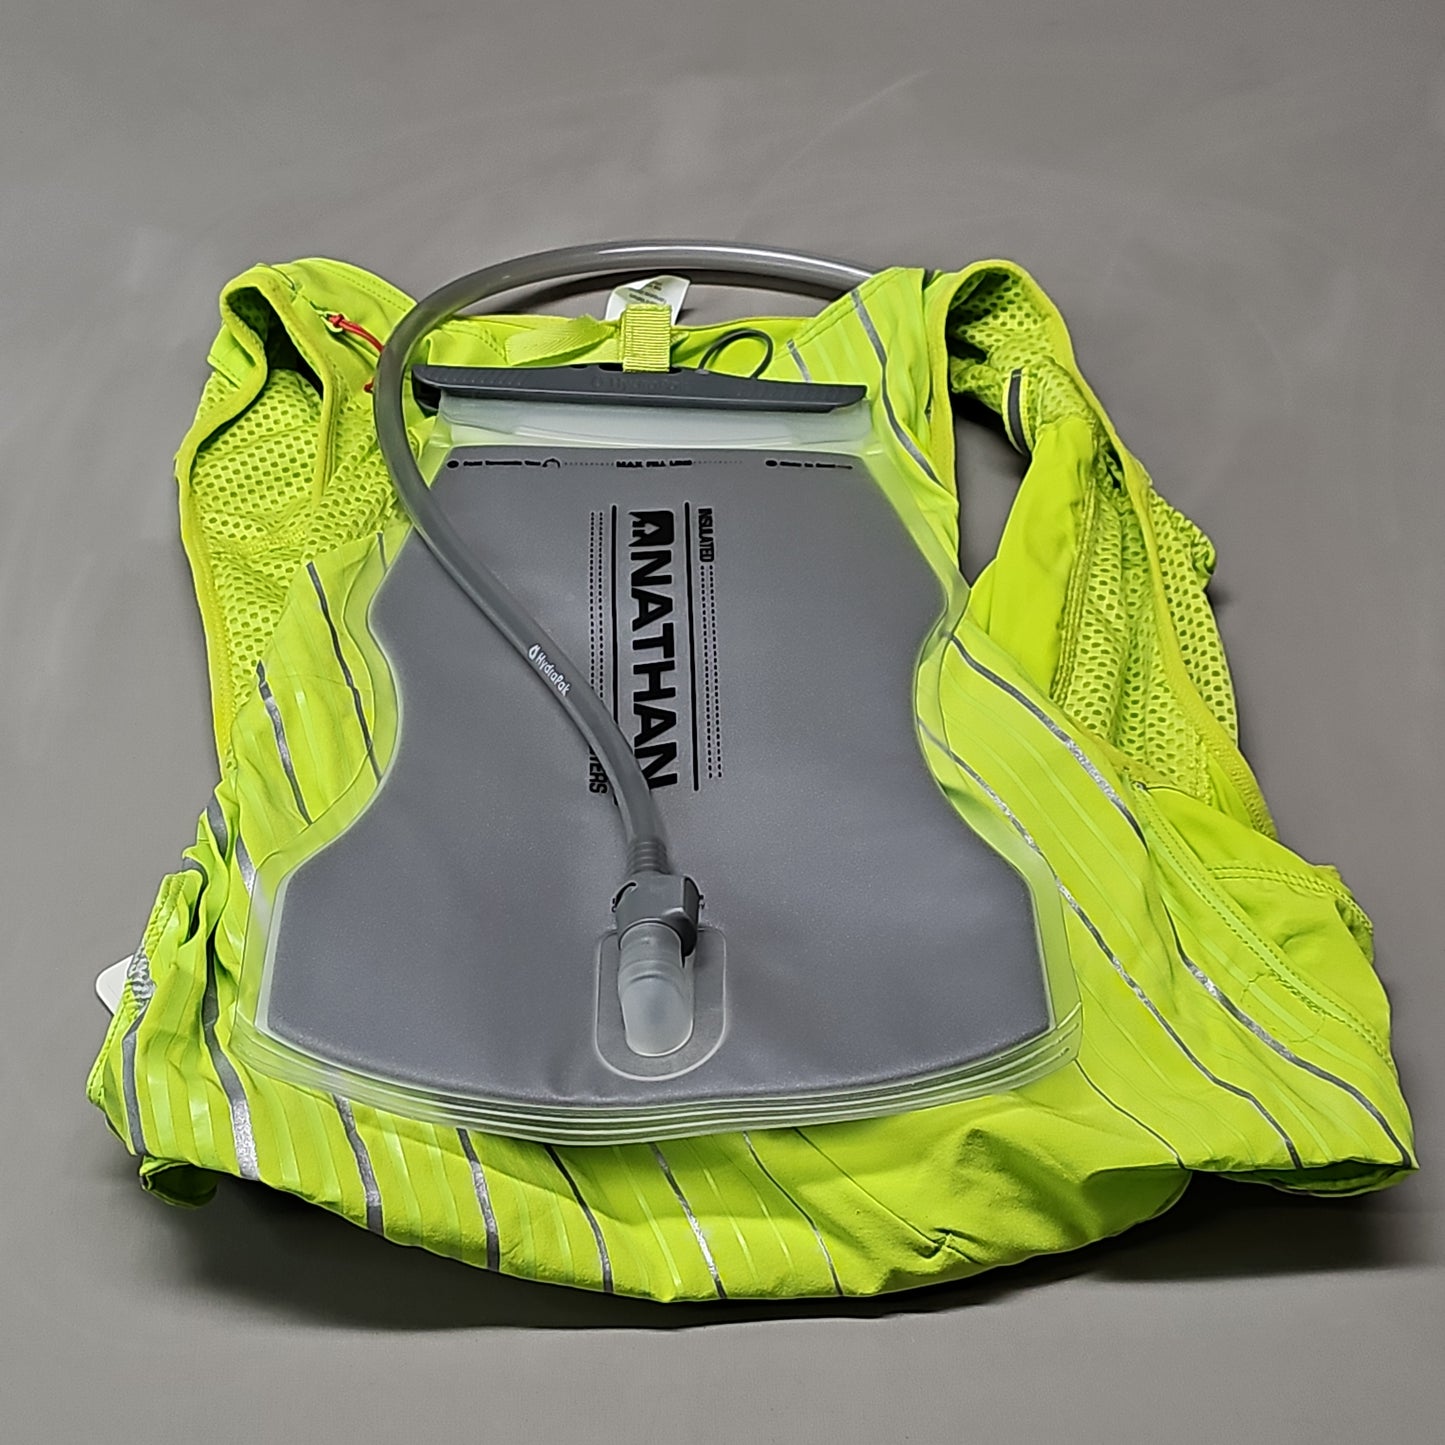 NATHAN Pinnacle 12 Liter Hydration Race Vest Womens Sz L Finish Lime/Hibiscus (New)